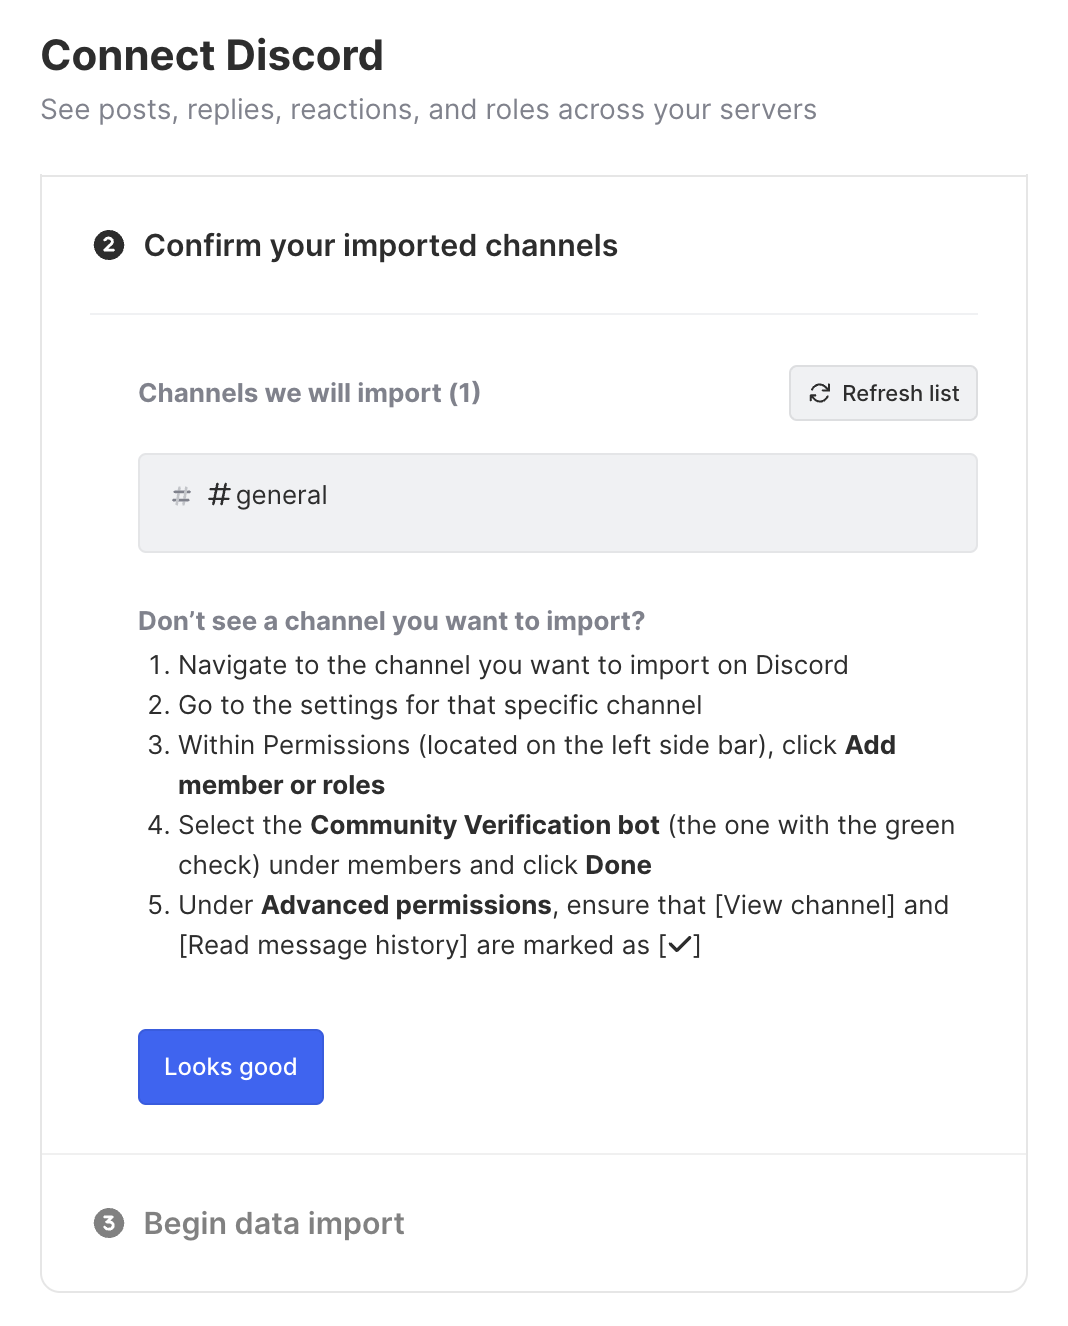 Confirm channels to import from Discord to Common Room